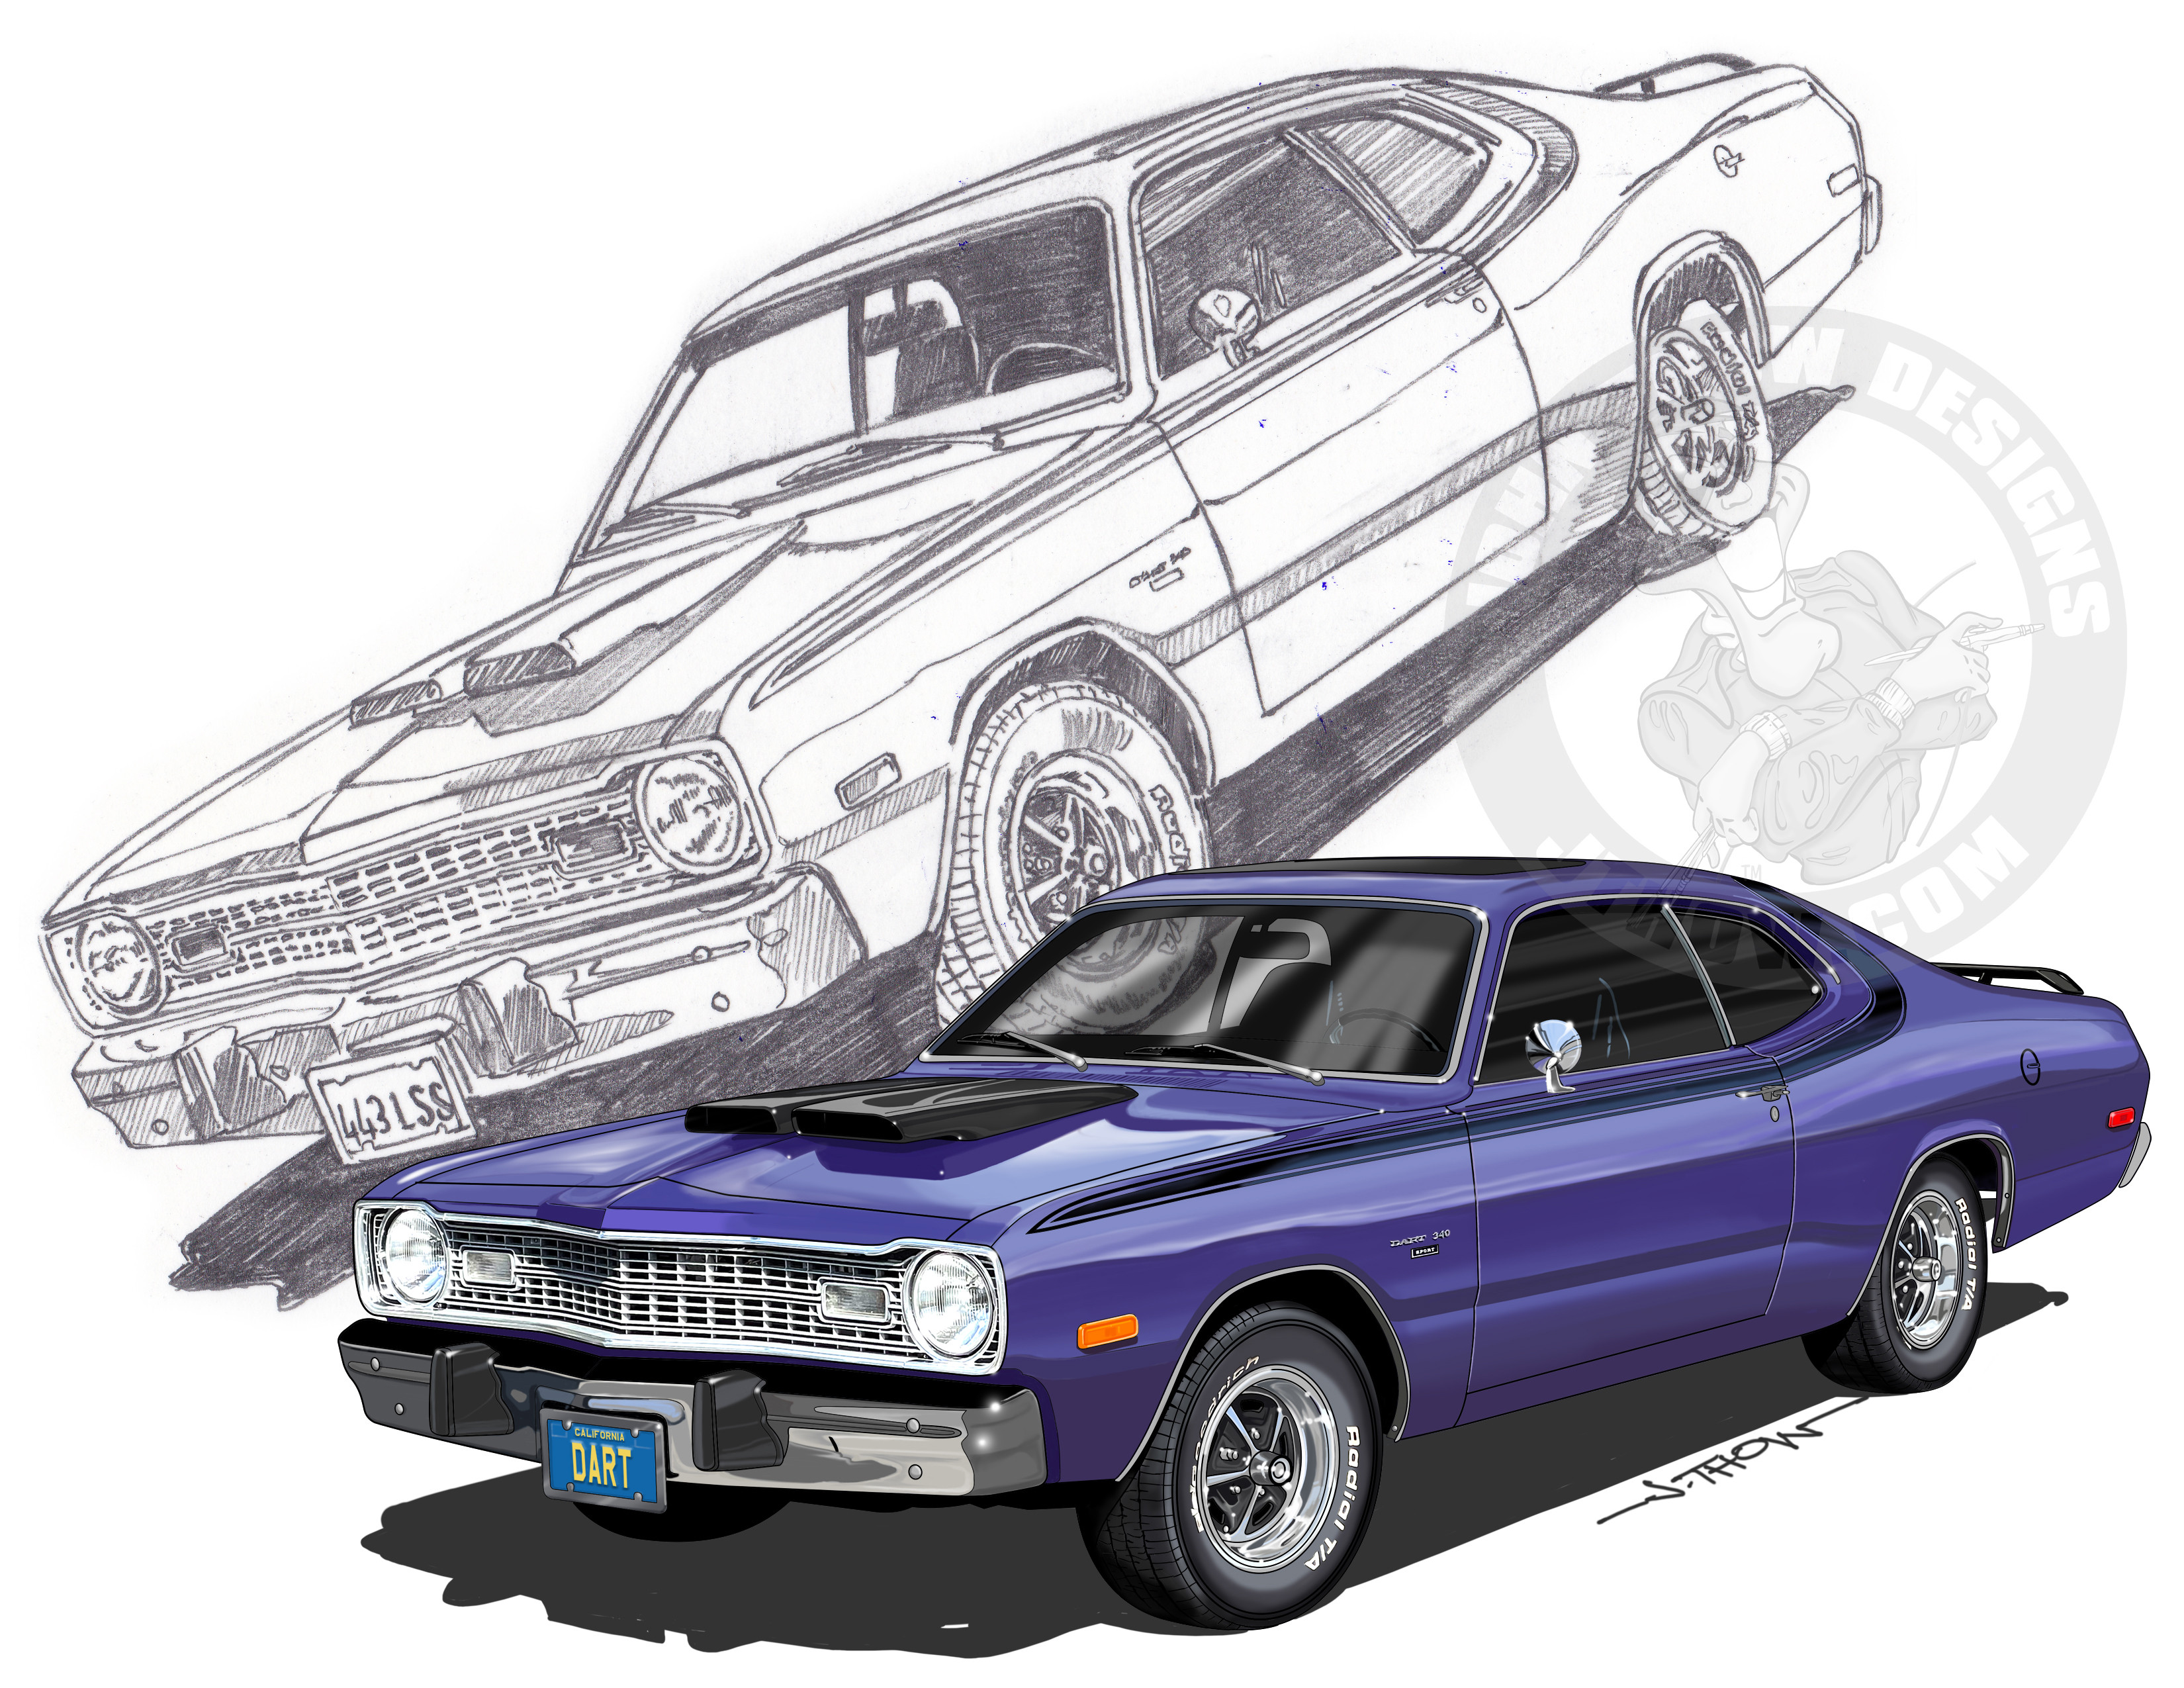 The original sketch and close up detail view of the Dodge Dart from the 2022 Wheels N Windmills Car Show Art.